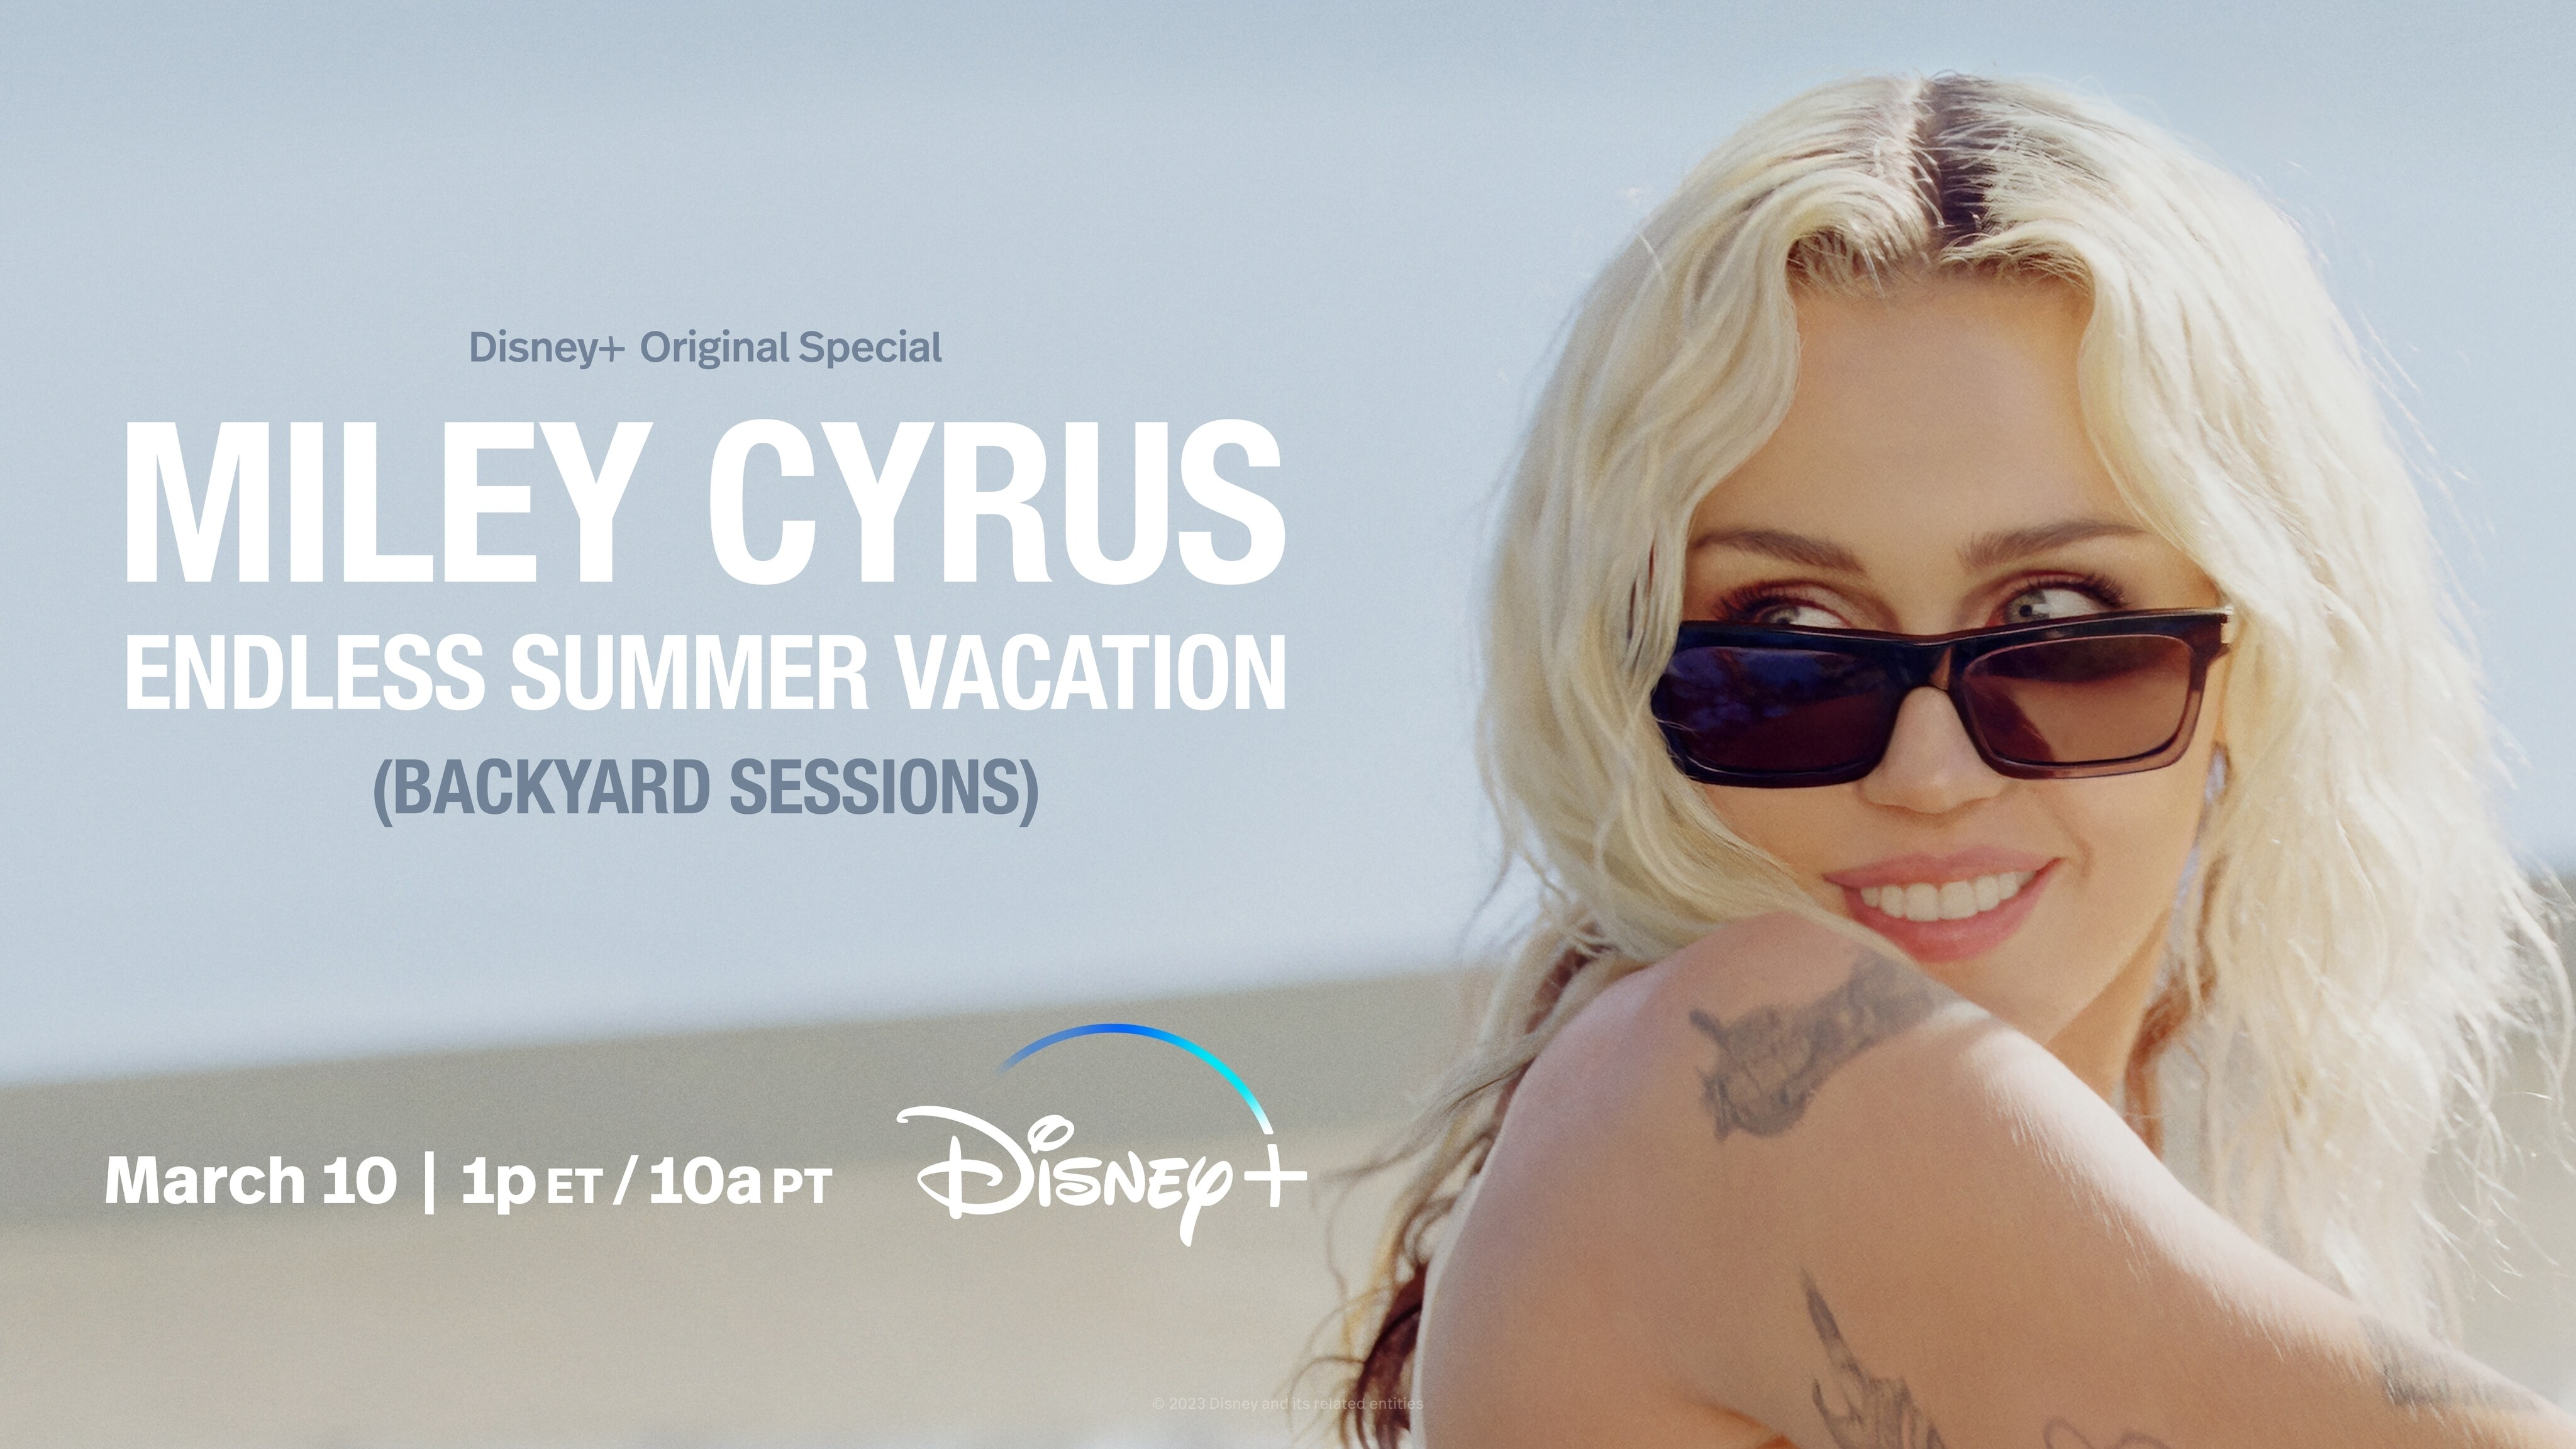 Miley Cyrus & Disney Reunite For The Disney+ Original Special Event: “Miley Cyrus - Endless Summer Vacation (Backyard Sessions)”